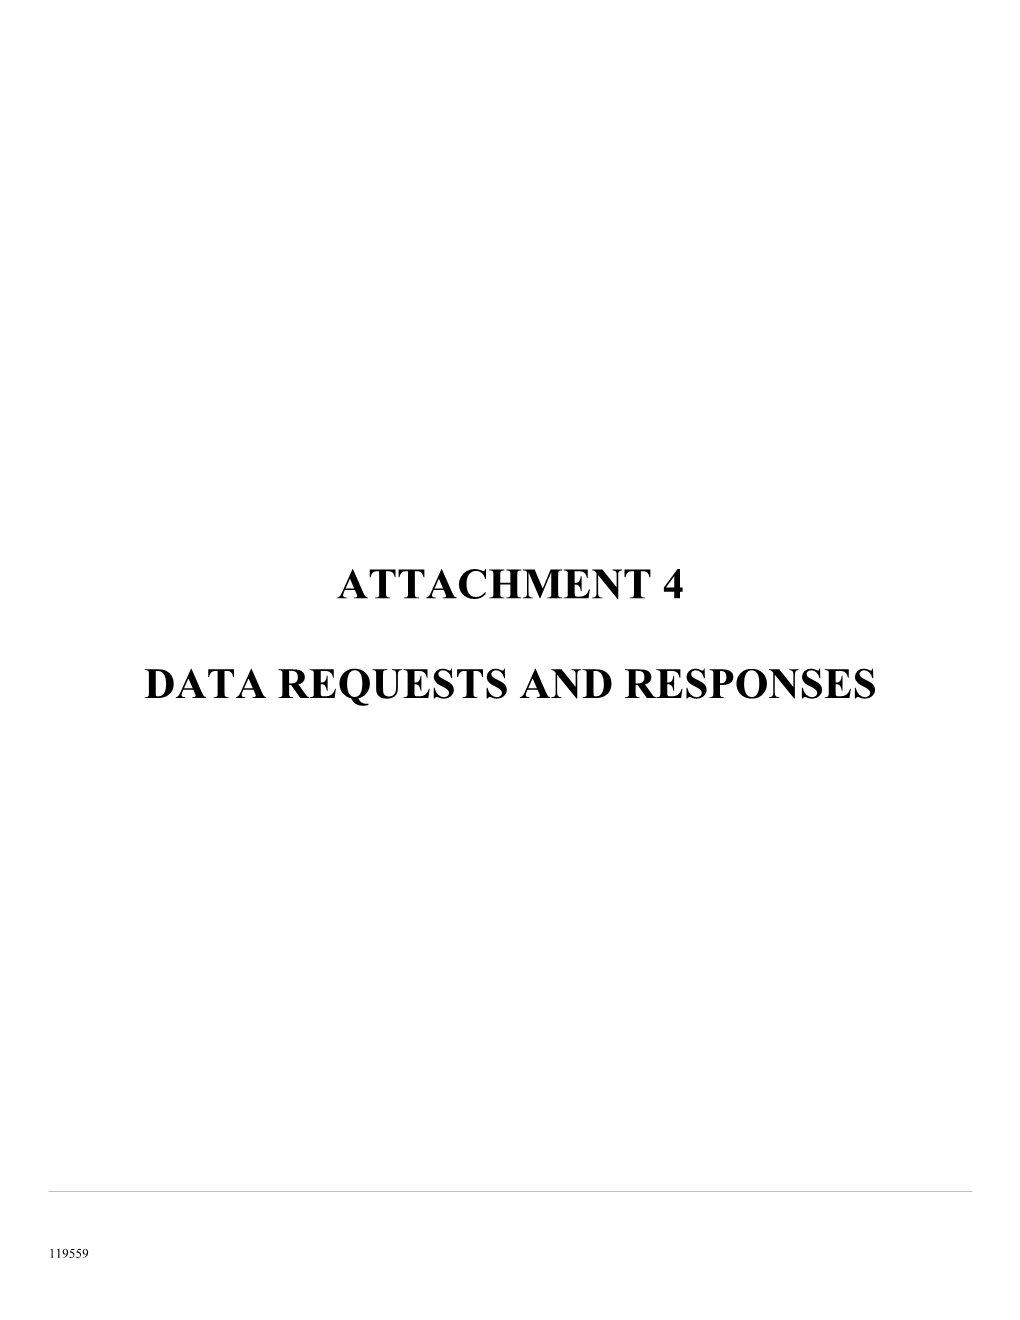 Data Requests and Responses